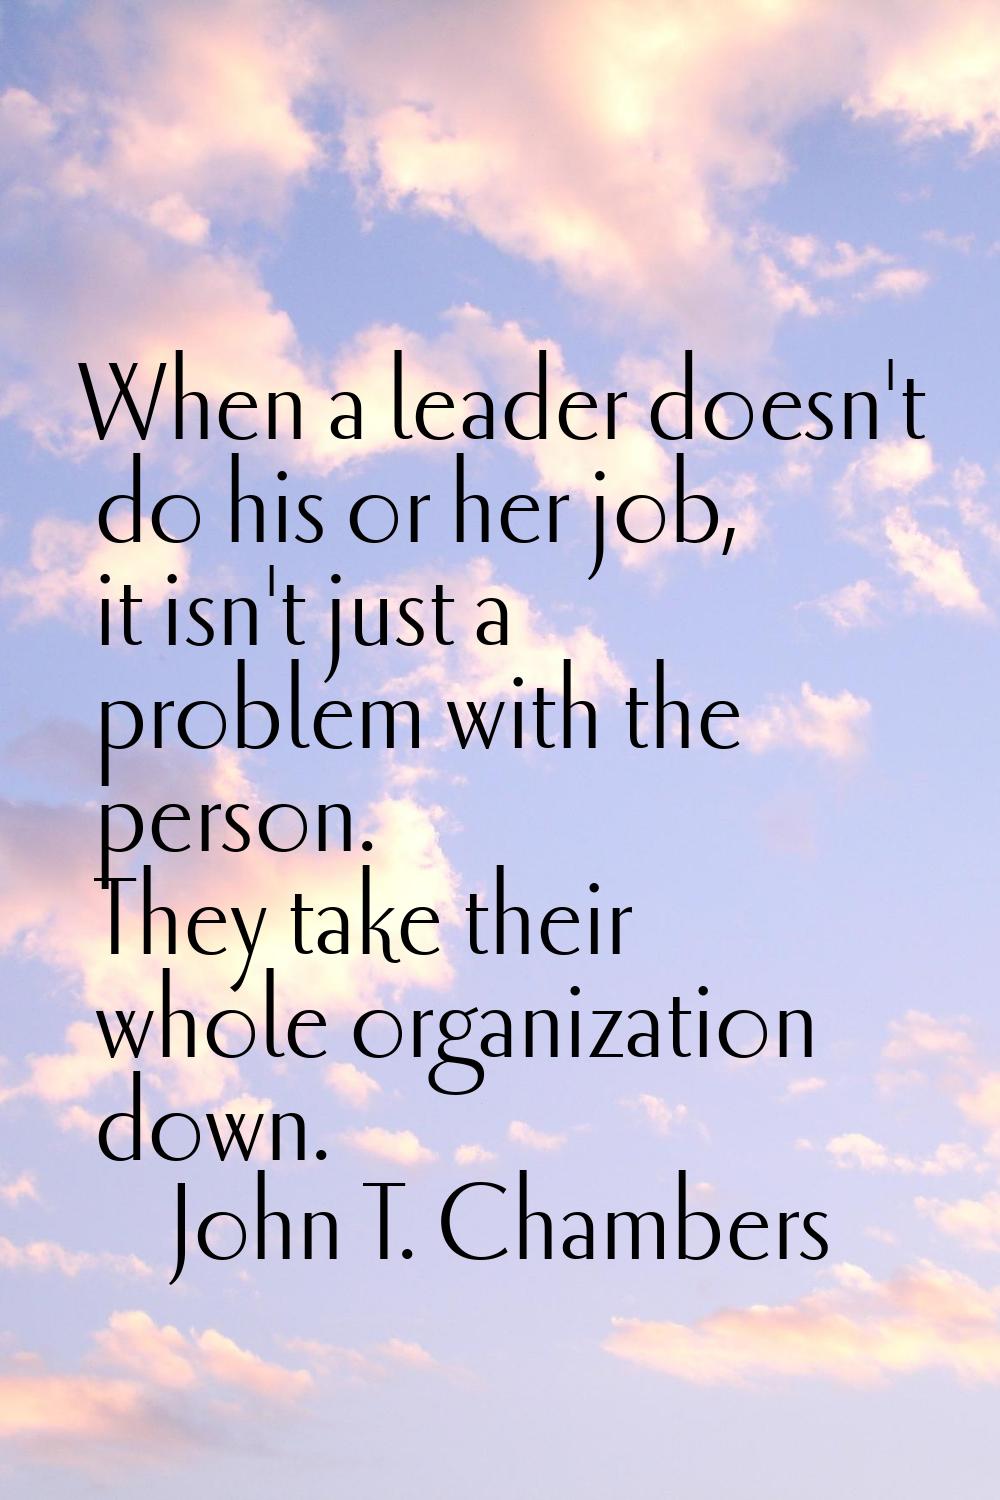 When a leader doesn't do his or her job, it isn't just a problem with the person. They take their w